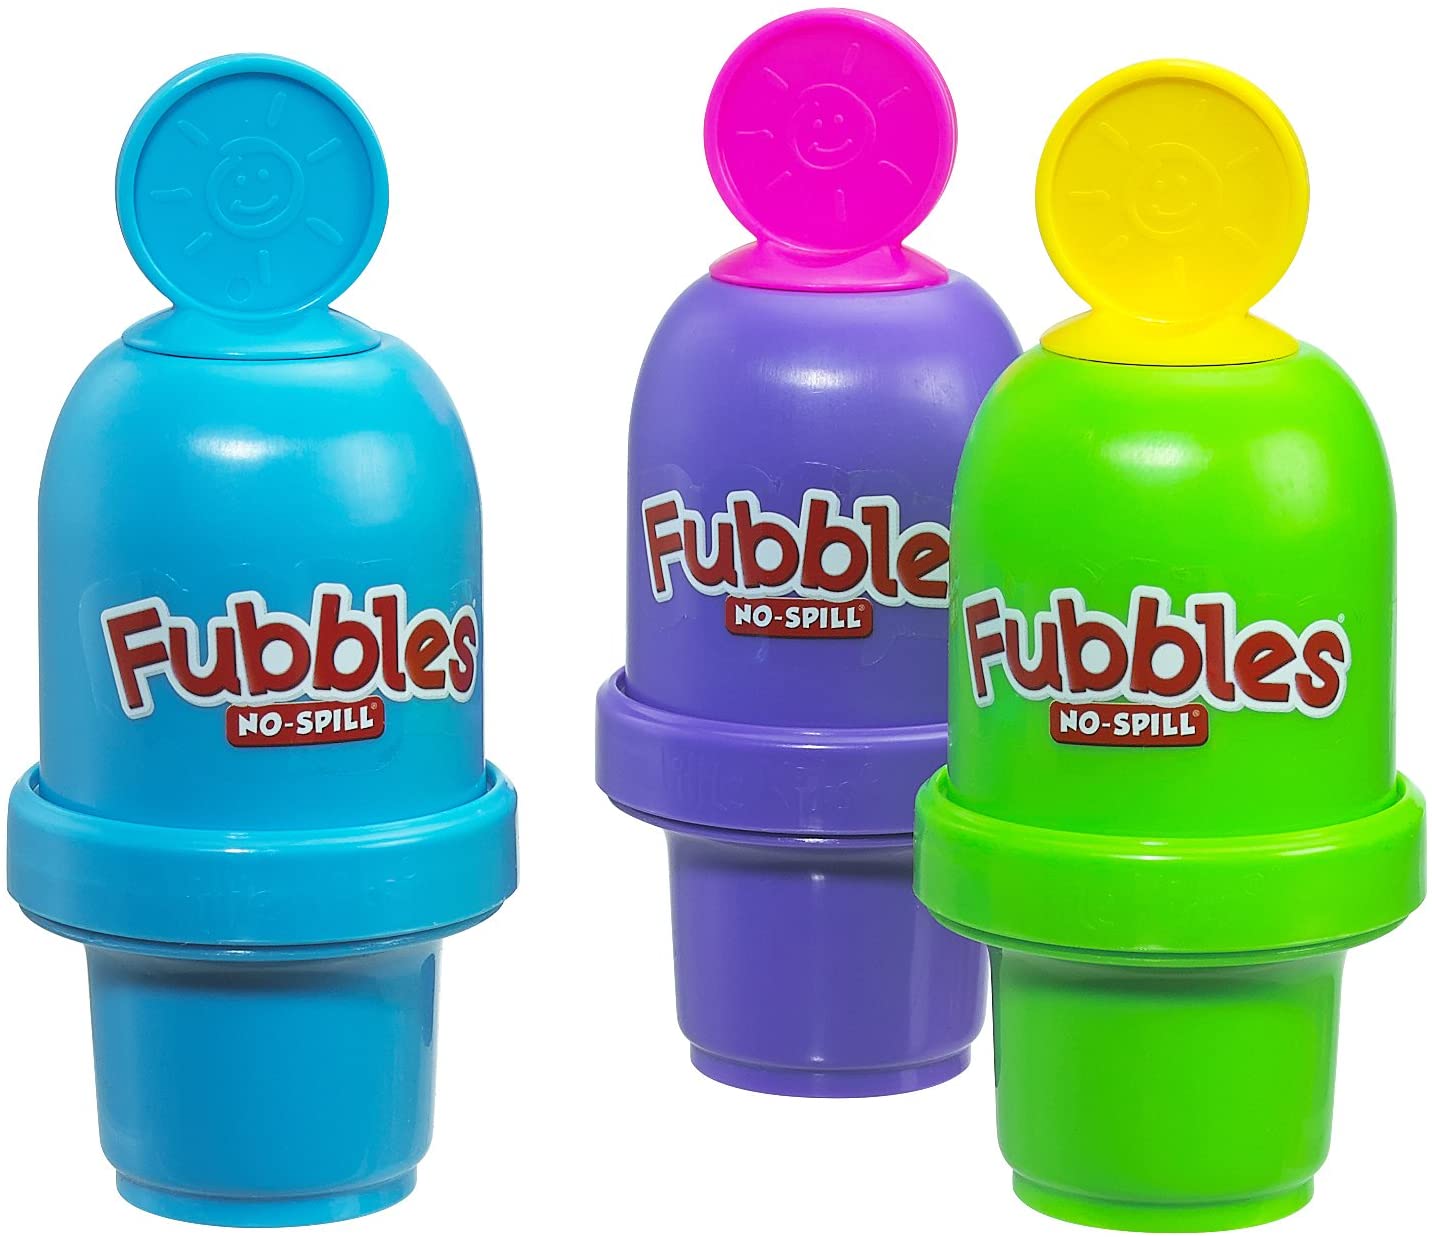 Beyond Play: No-Spill Bubble Tumbler - Products for Early